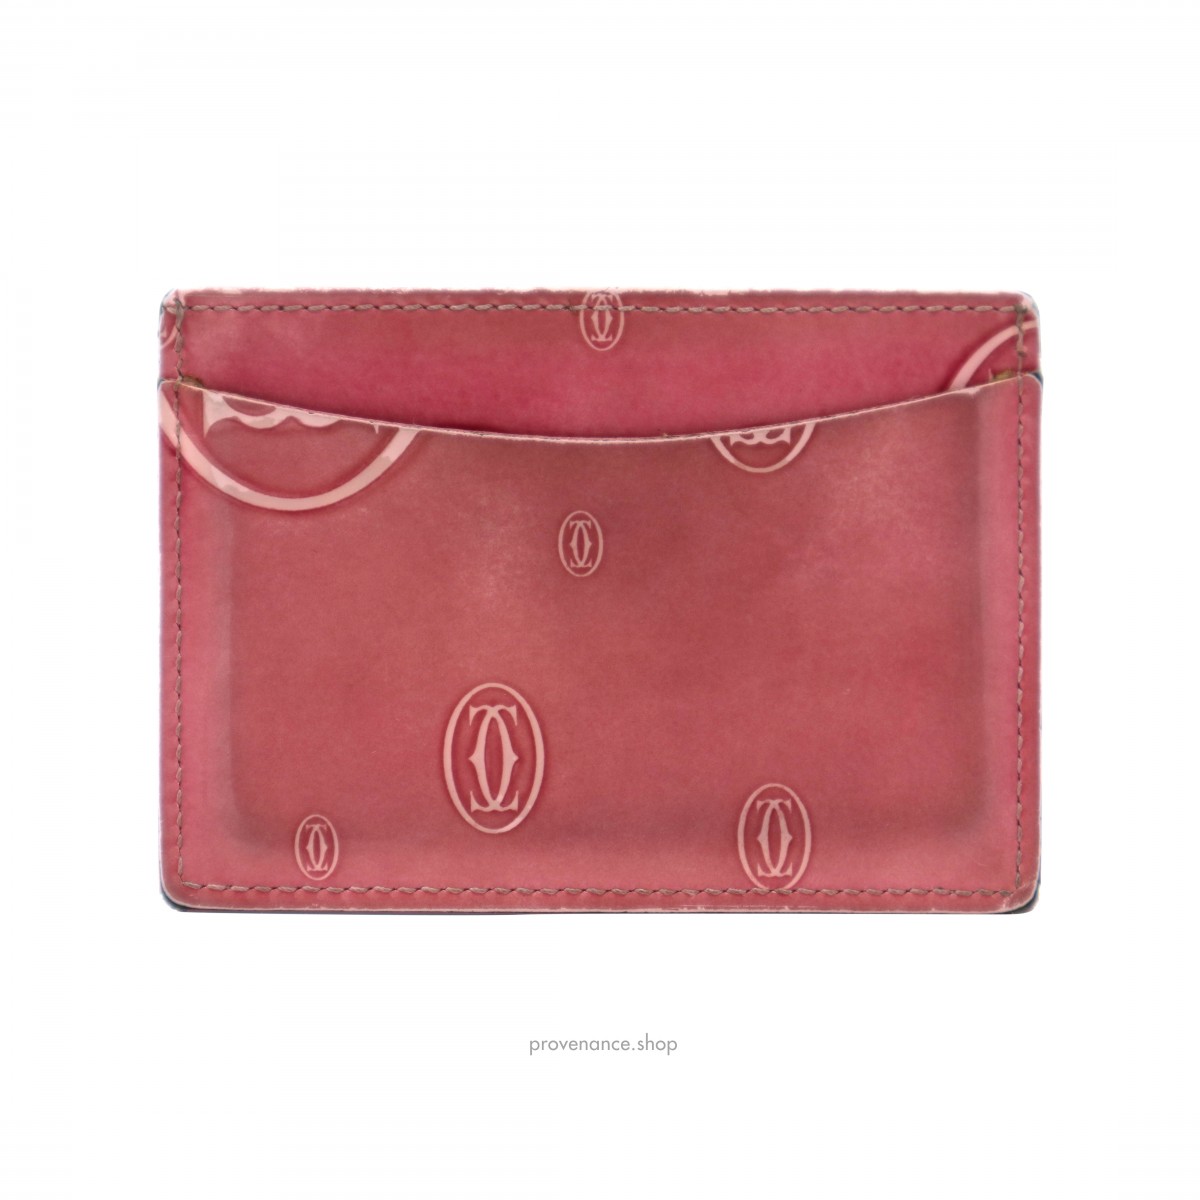 Cartier Happy Cardholder - Pink Patent Leather - 2